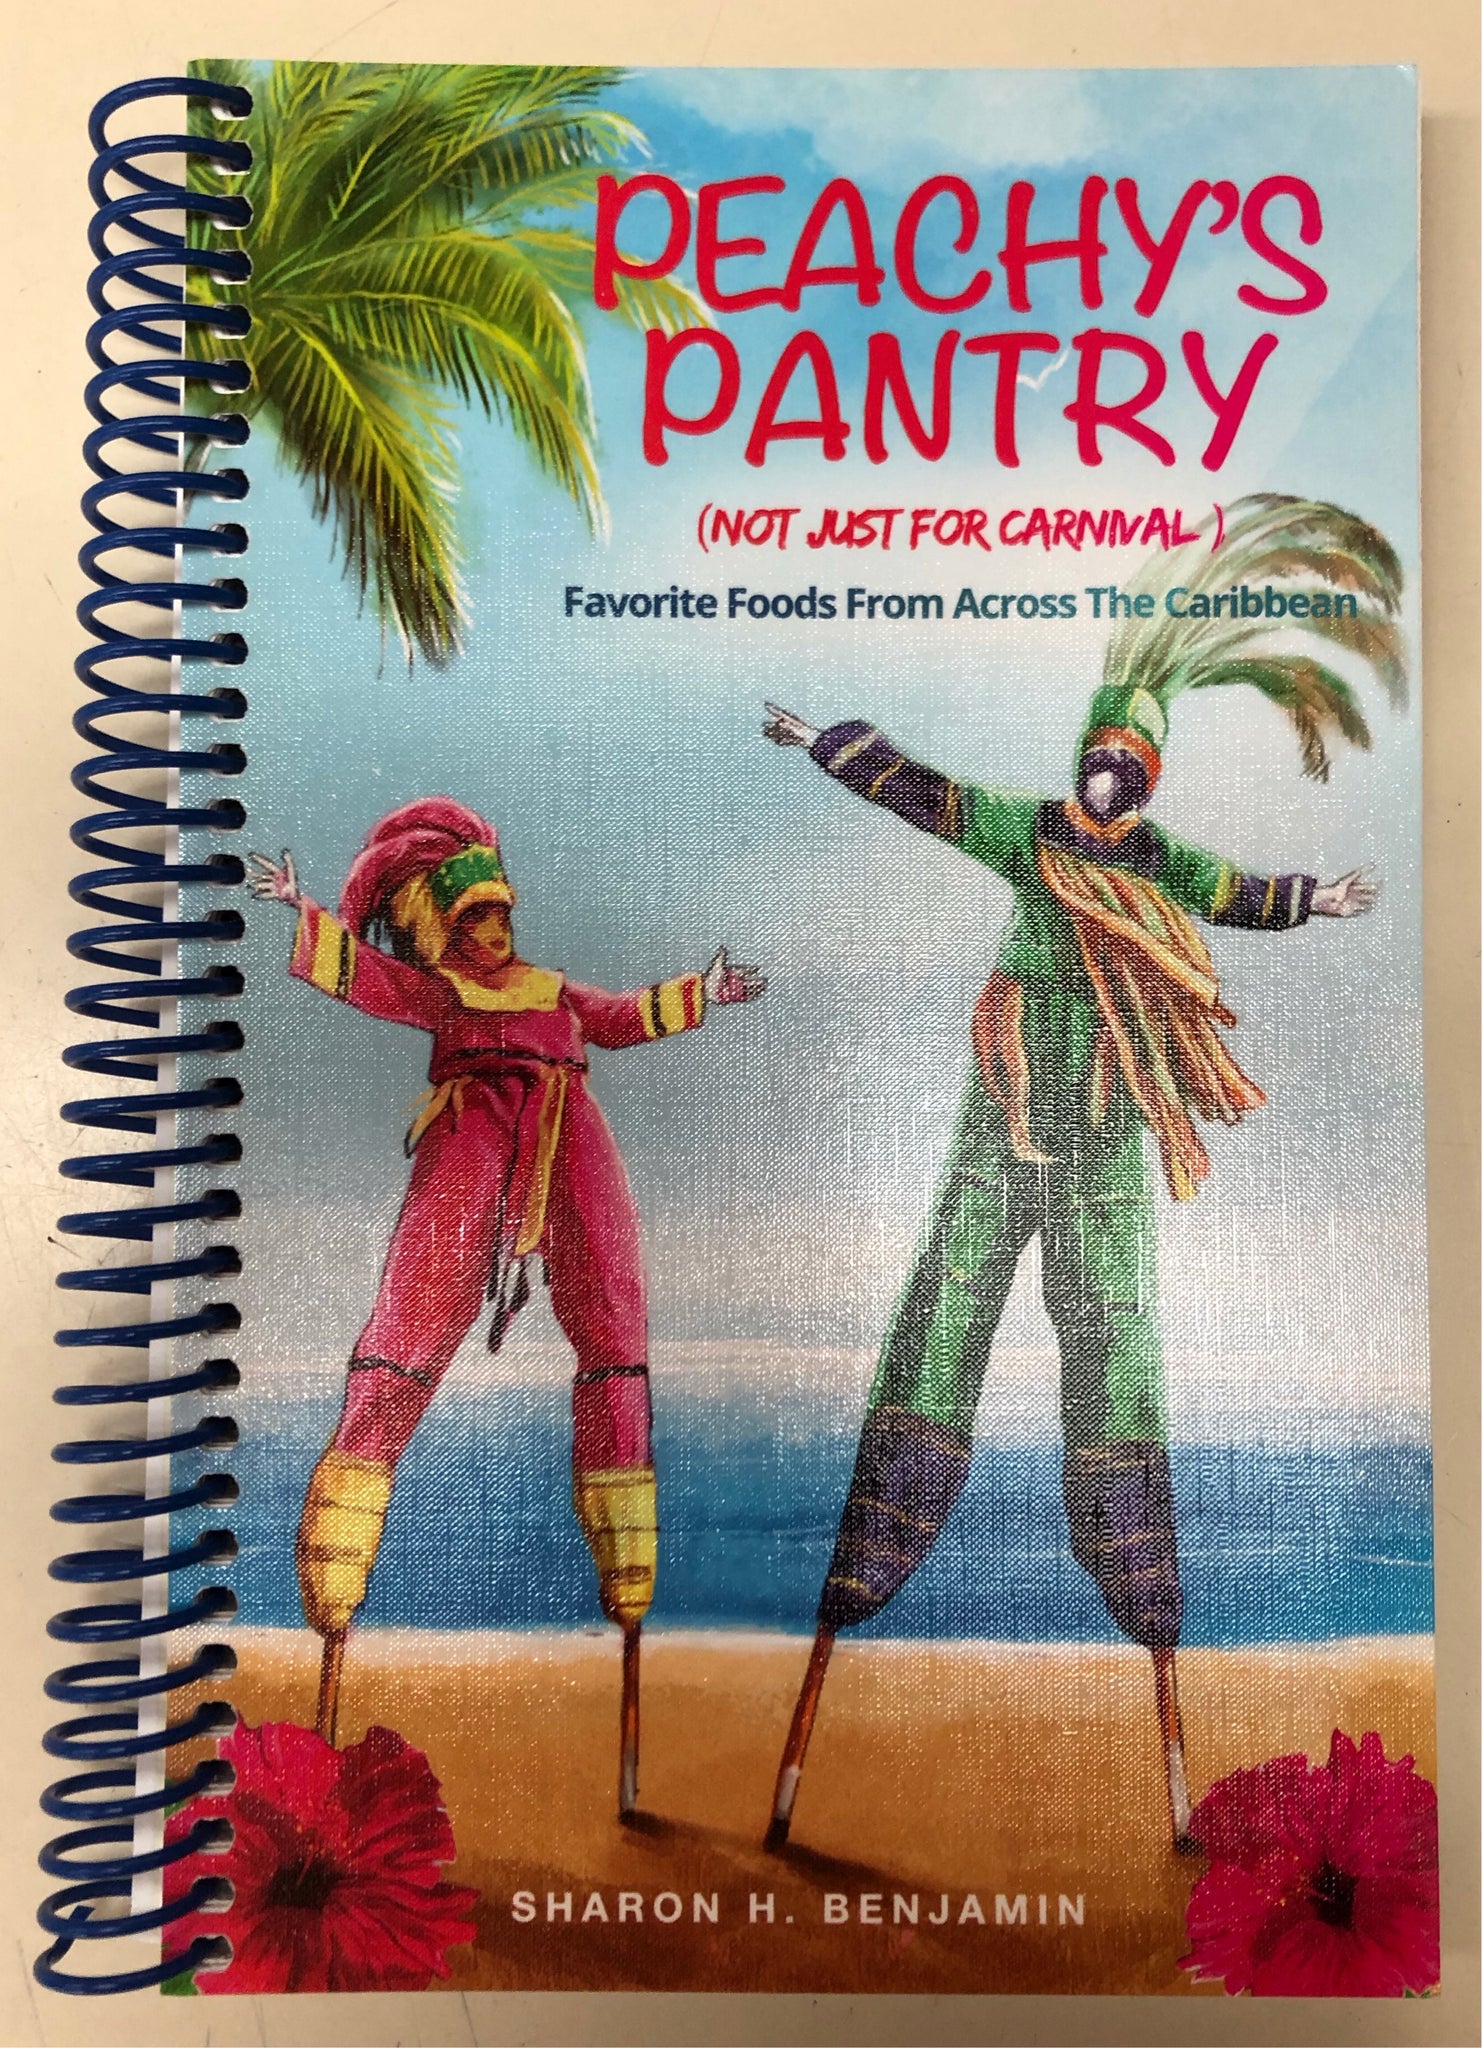 Peachy's Pantry Cookbook (Not Just For Carnival) by Sharon H Benjamin